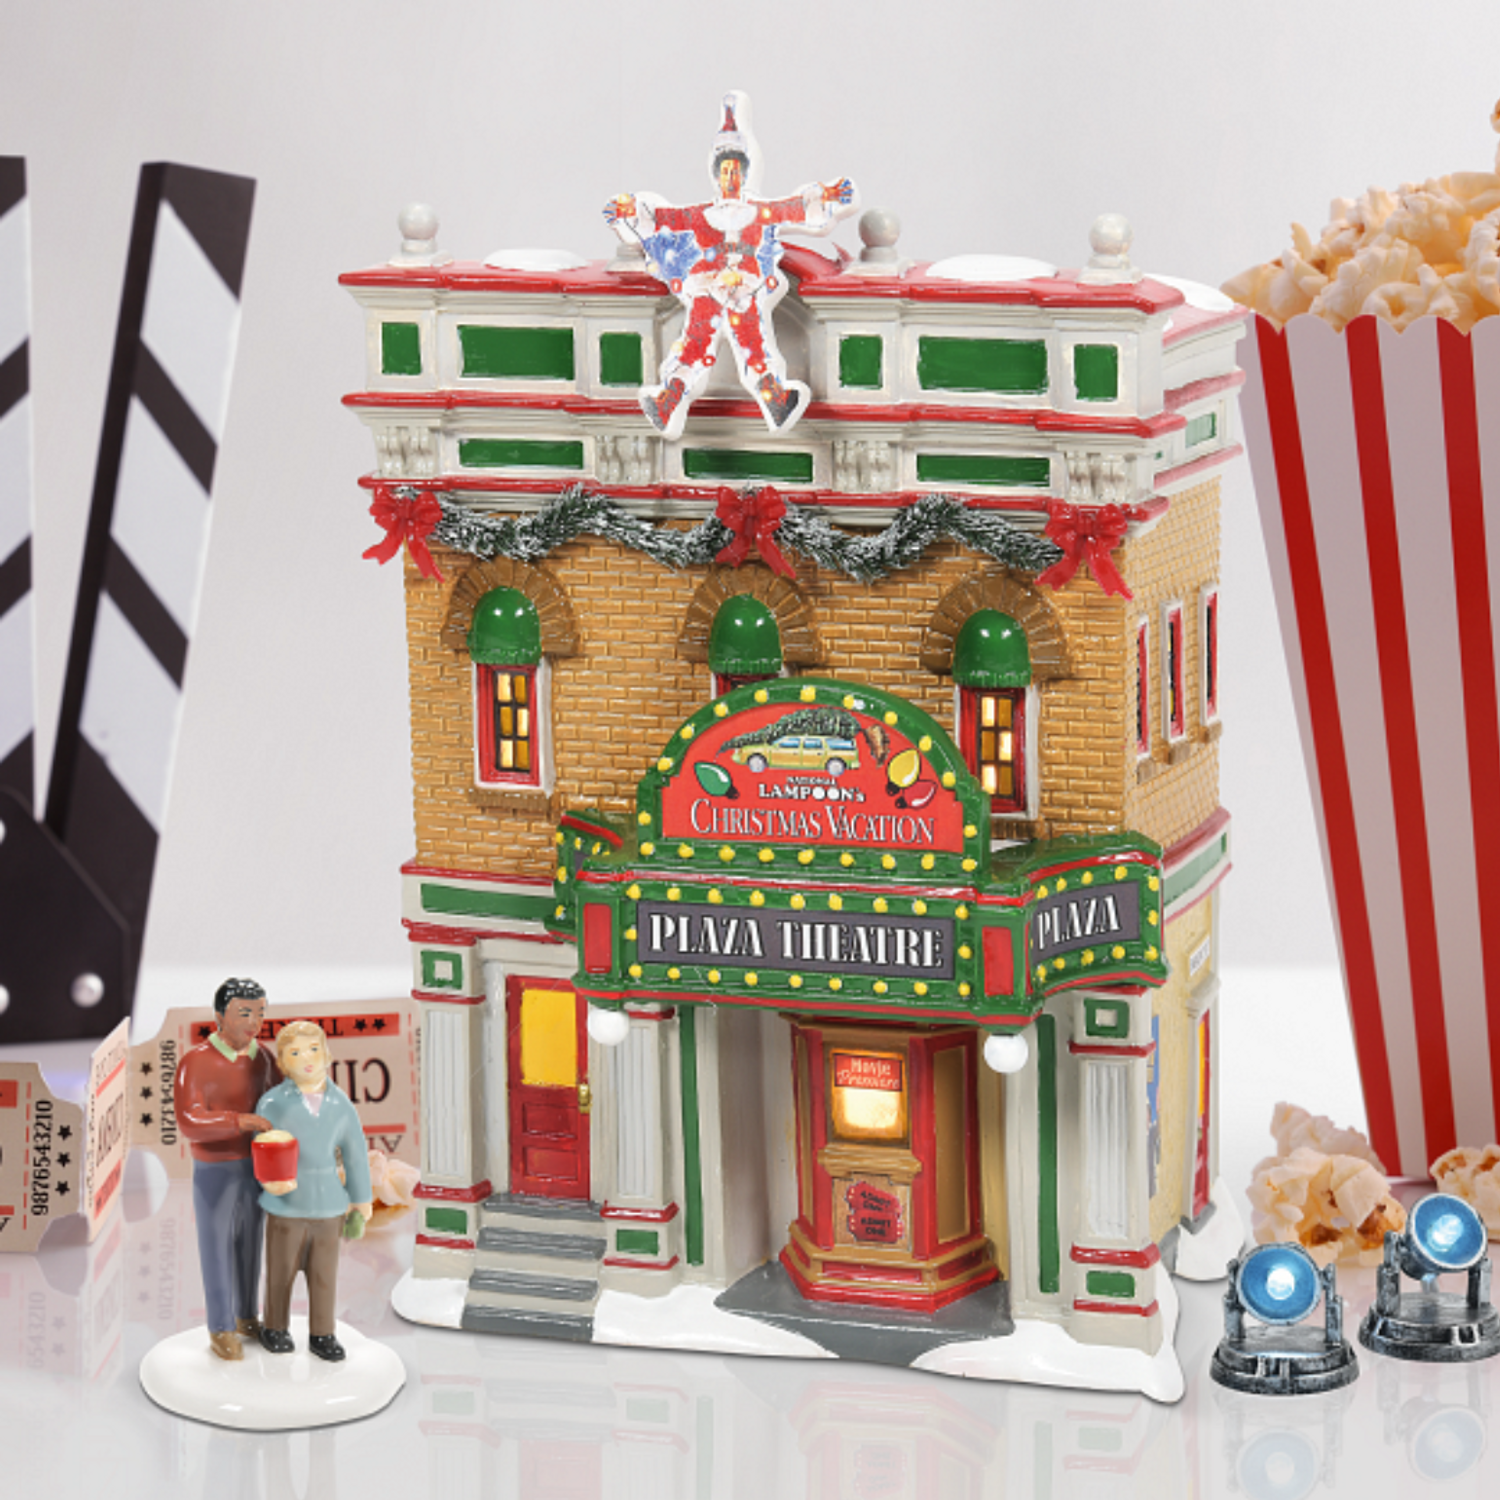 Premiere at the Plaza from Dept 56 Christmas Vacation Village – Cleveland  Street Novelties